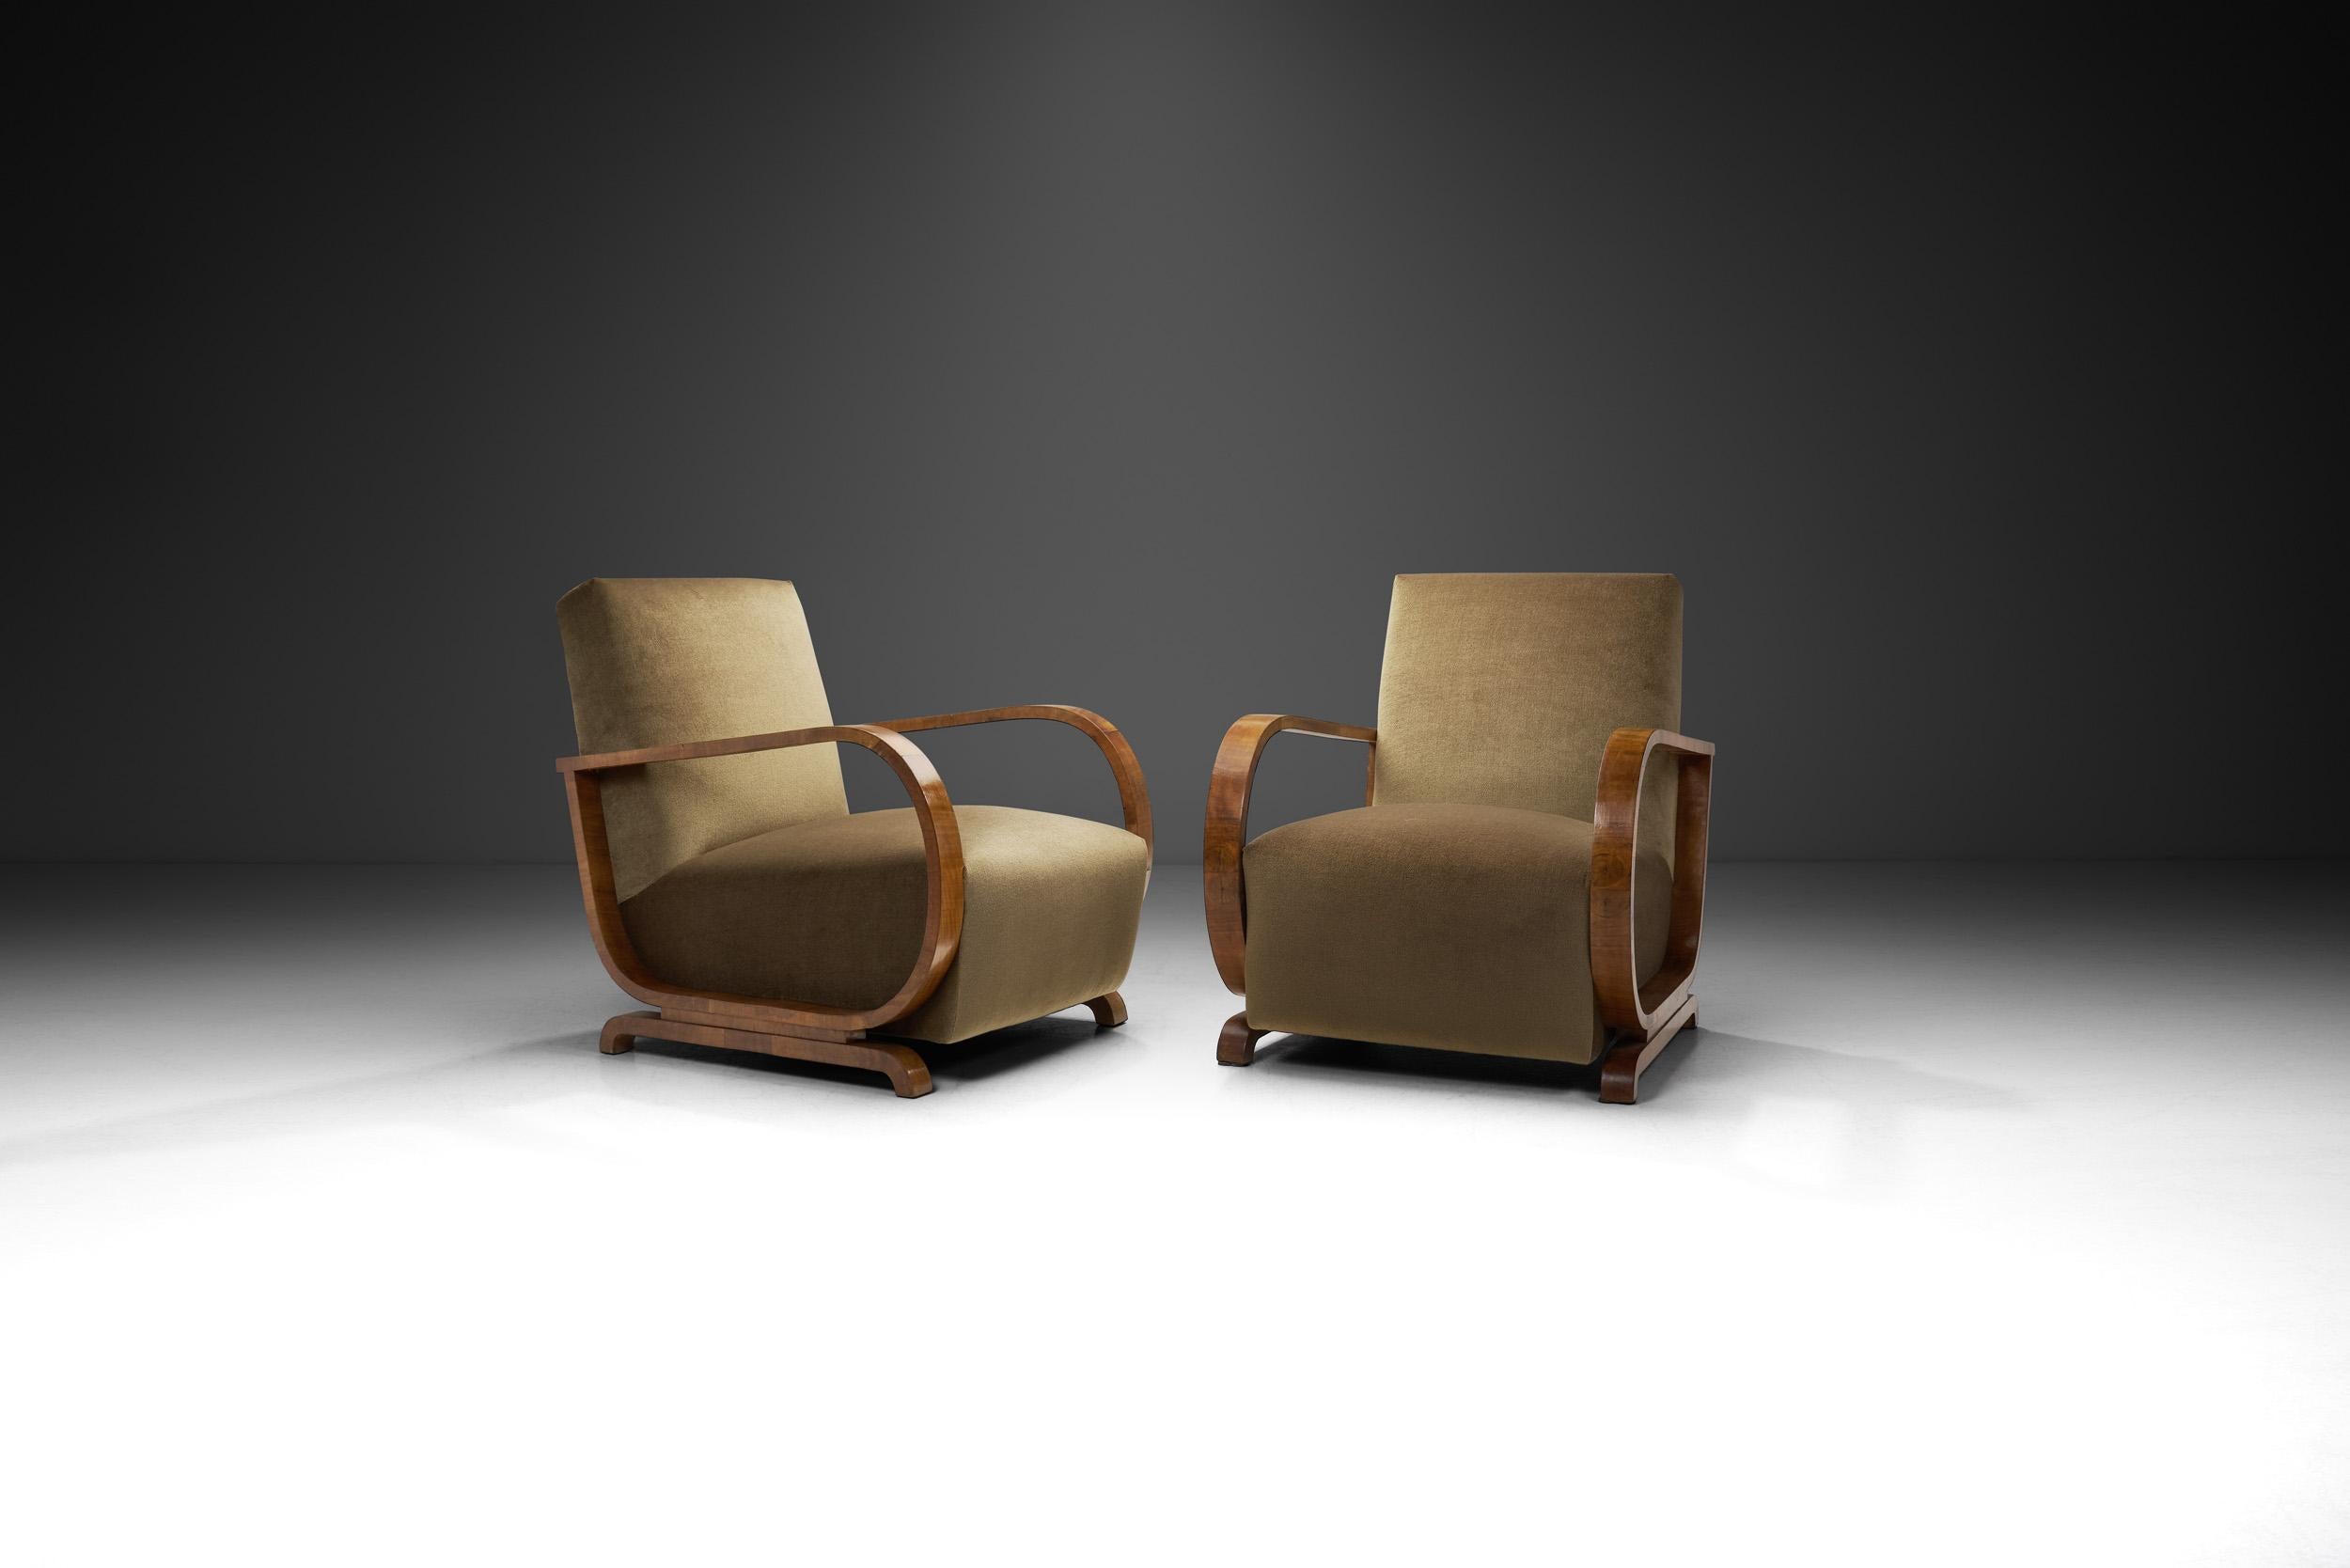 Art Deco was an era defining movement in furniture design. These Art Deco chairs were created during an age of aesthetic creativity, and instantly recognizable design. As these armchairs show, European furniture designers’ artistic approach was